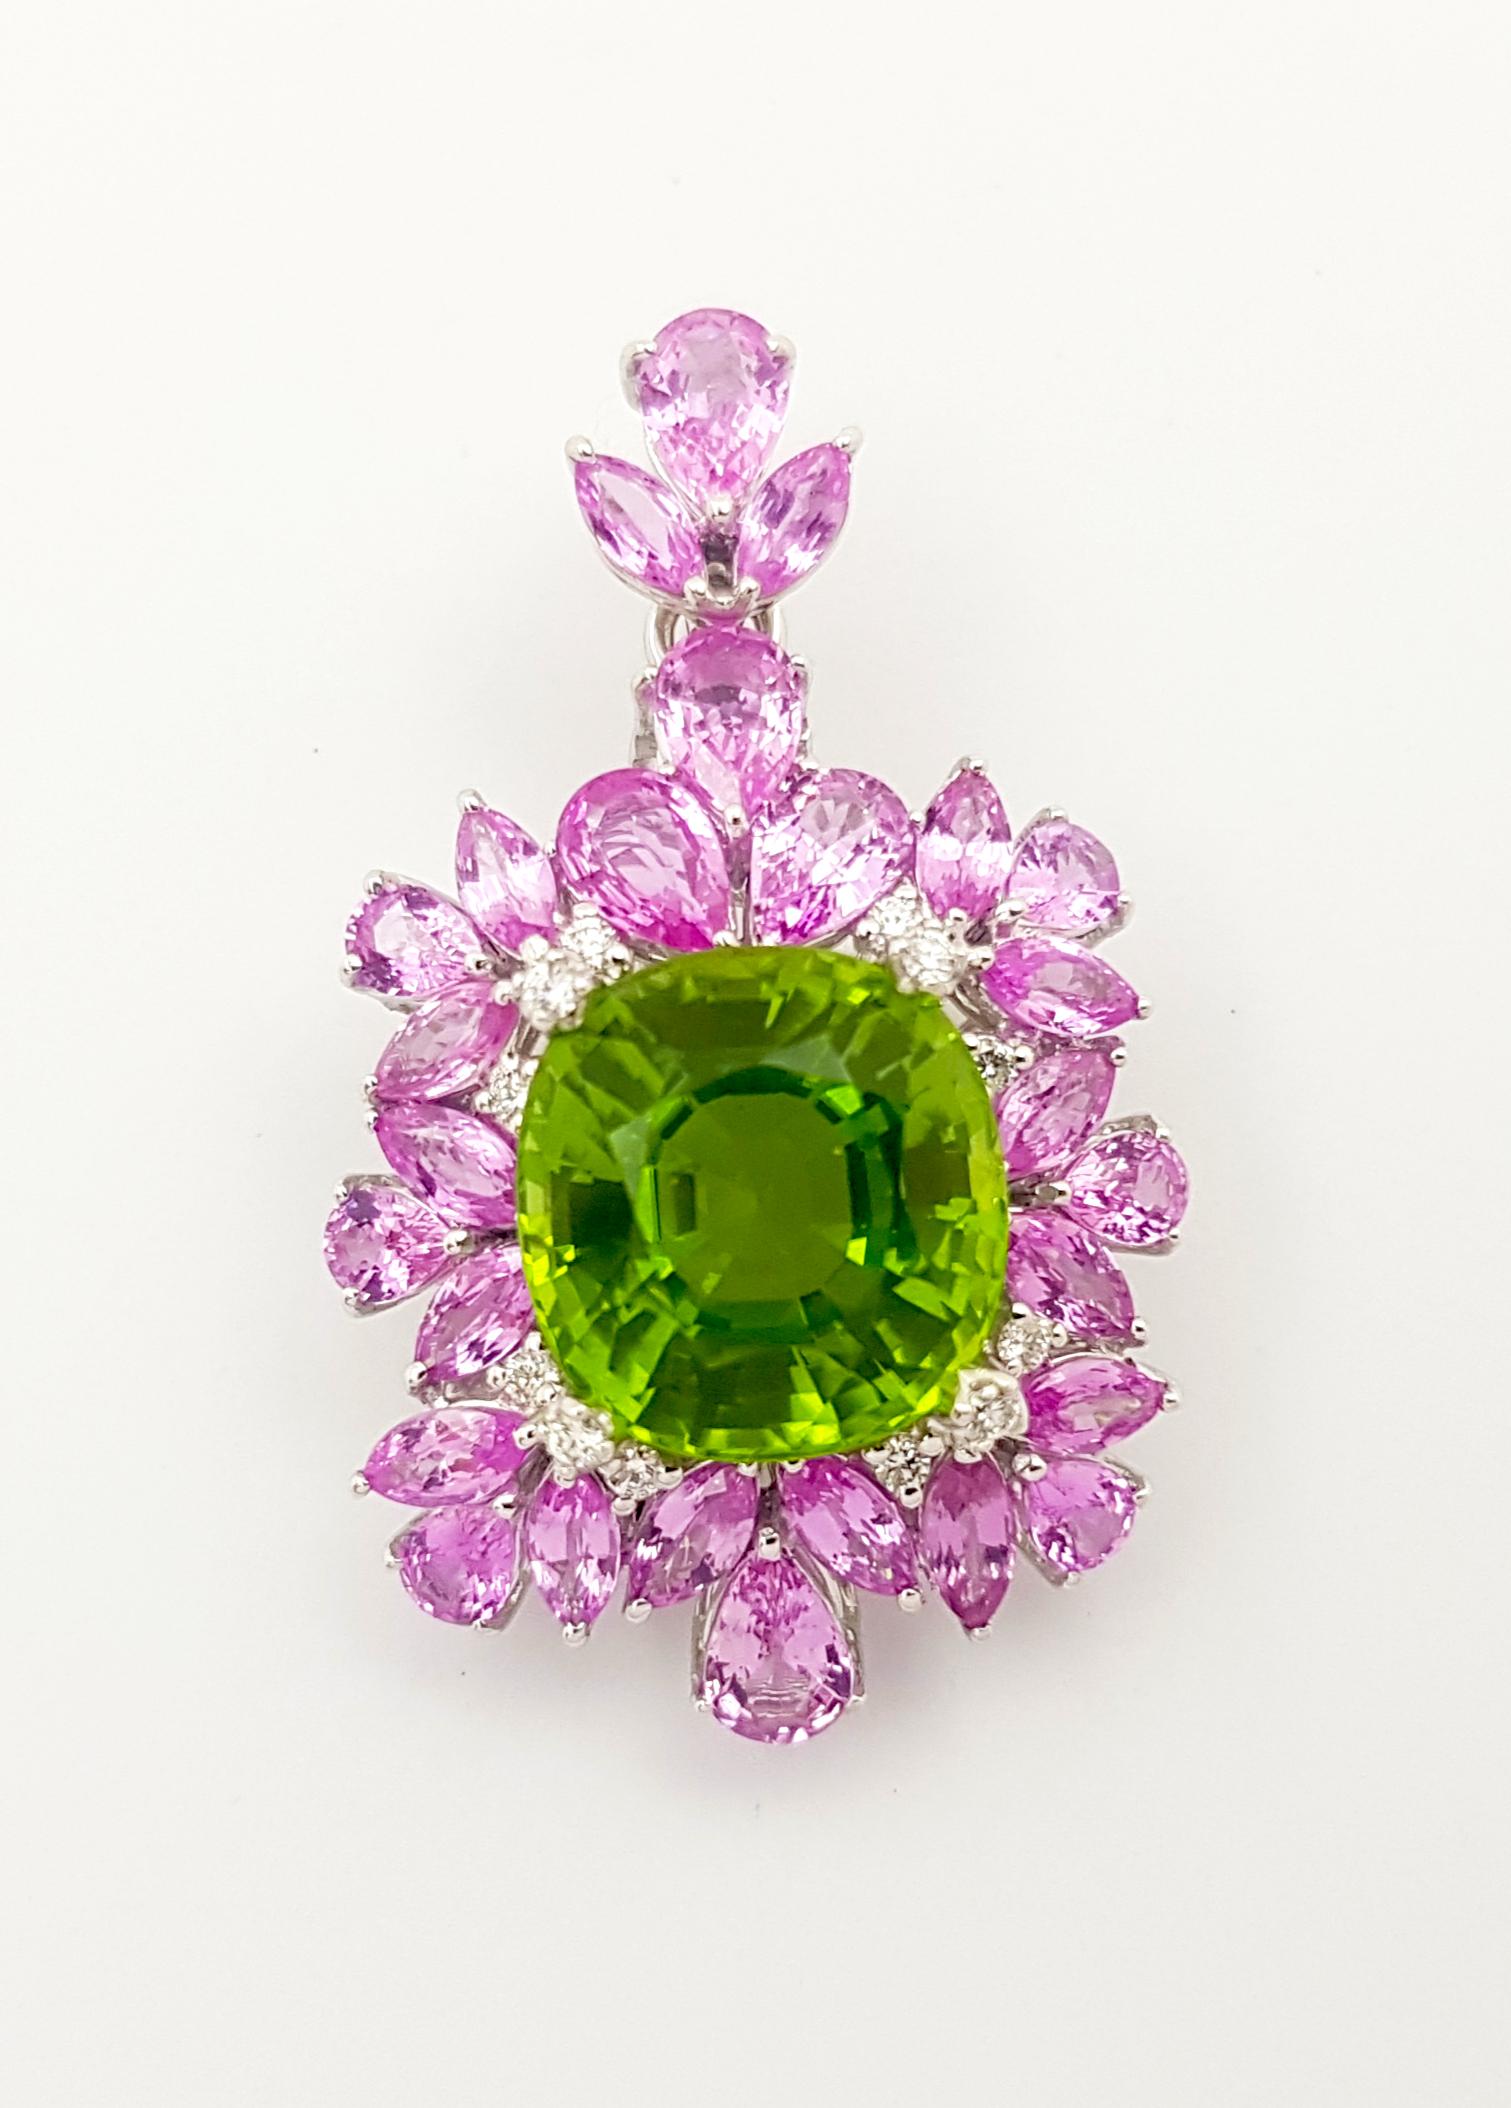 Peridot 9.70 carats, Pink Sapphire 5.83 carats and Diamond 0.15 carat Pendant set in 18K White Gold Settings
(chain not included)

Width: 2.2 cm 
Length: 3.3  cm
Total Weight: 8.92 grams

